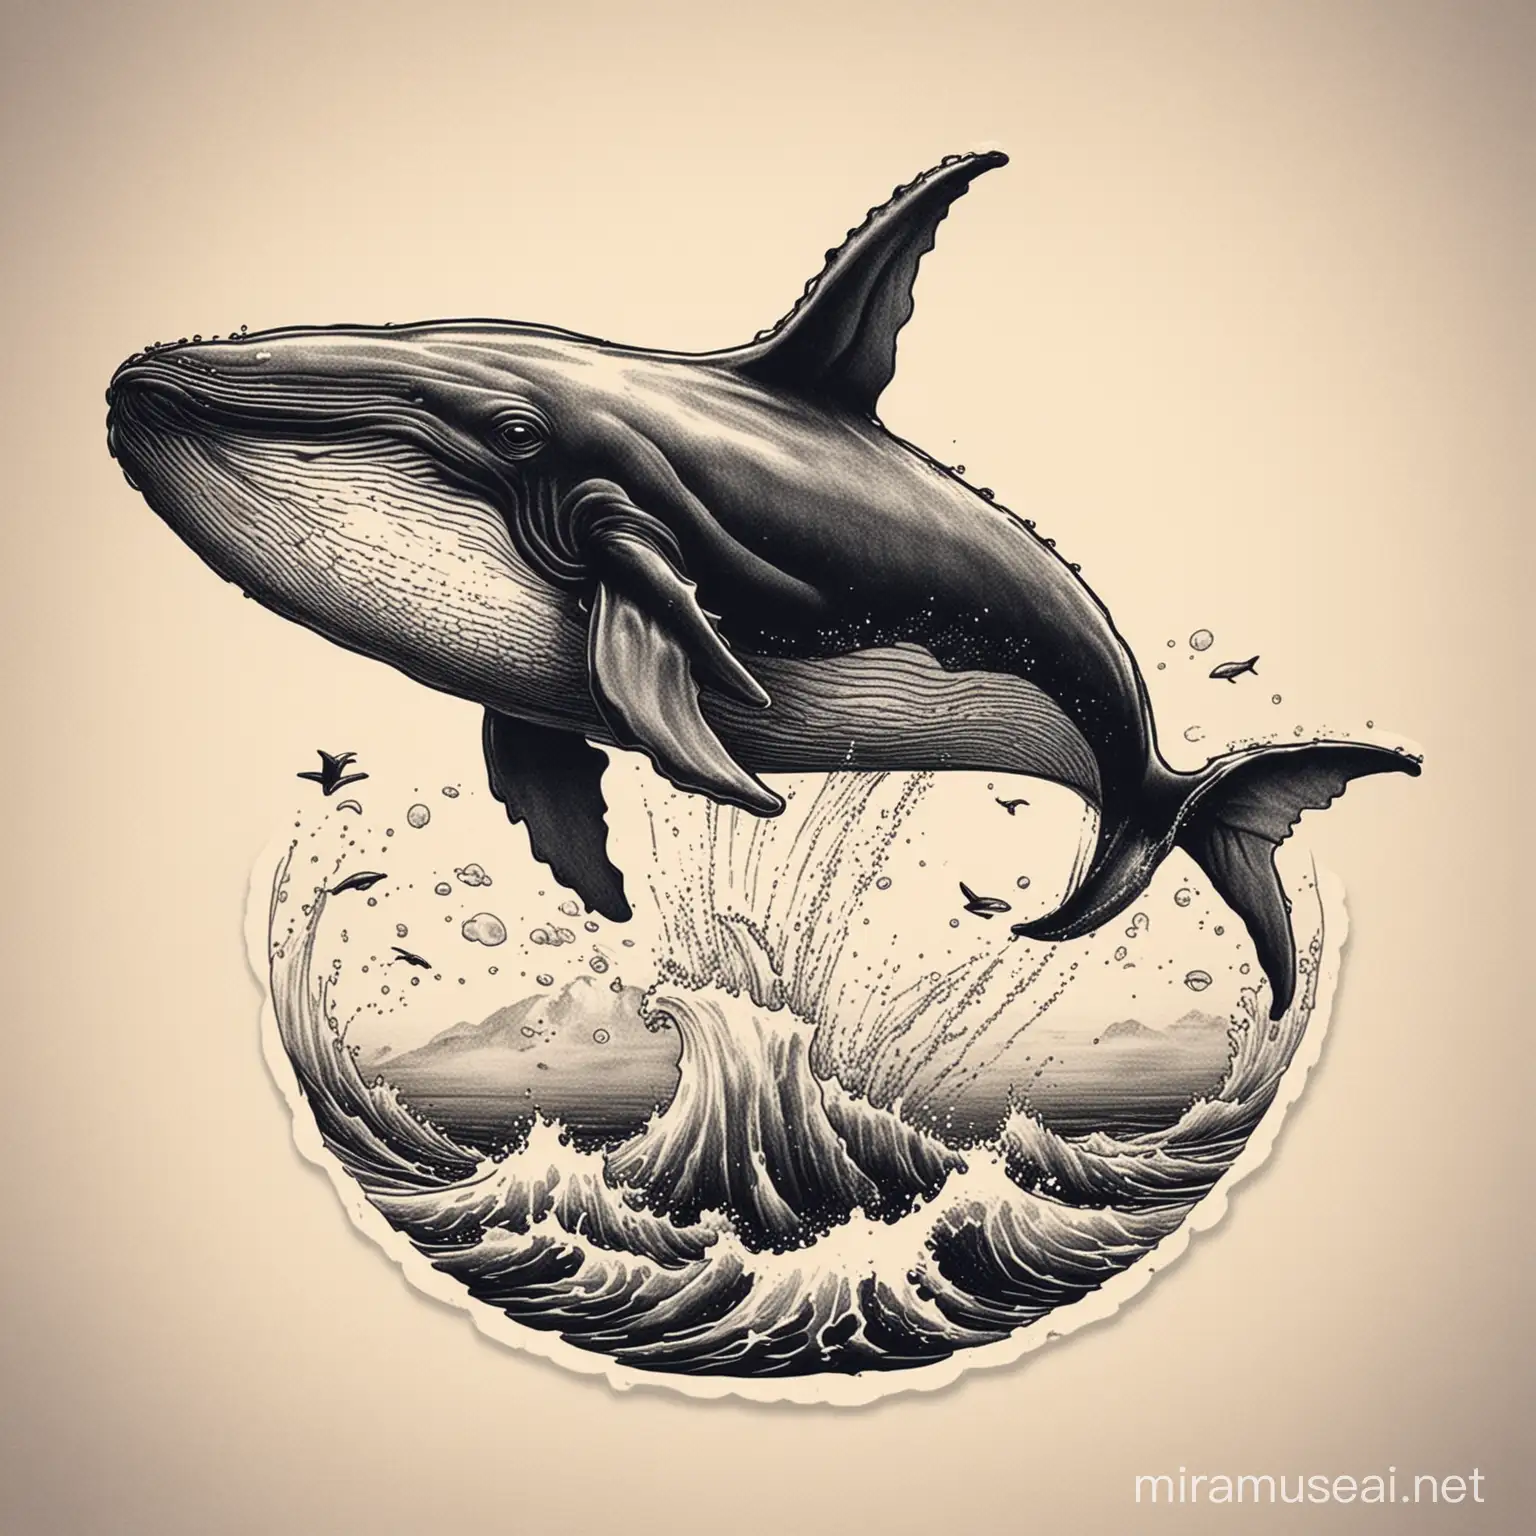 I want a tattoo with A whale jumps out of the ocean The image should be in sticker format, line art, or tattoo no colors black and white  